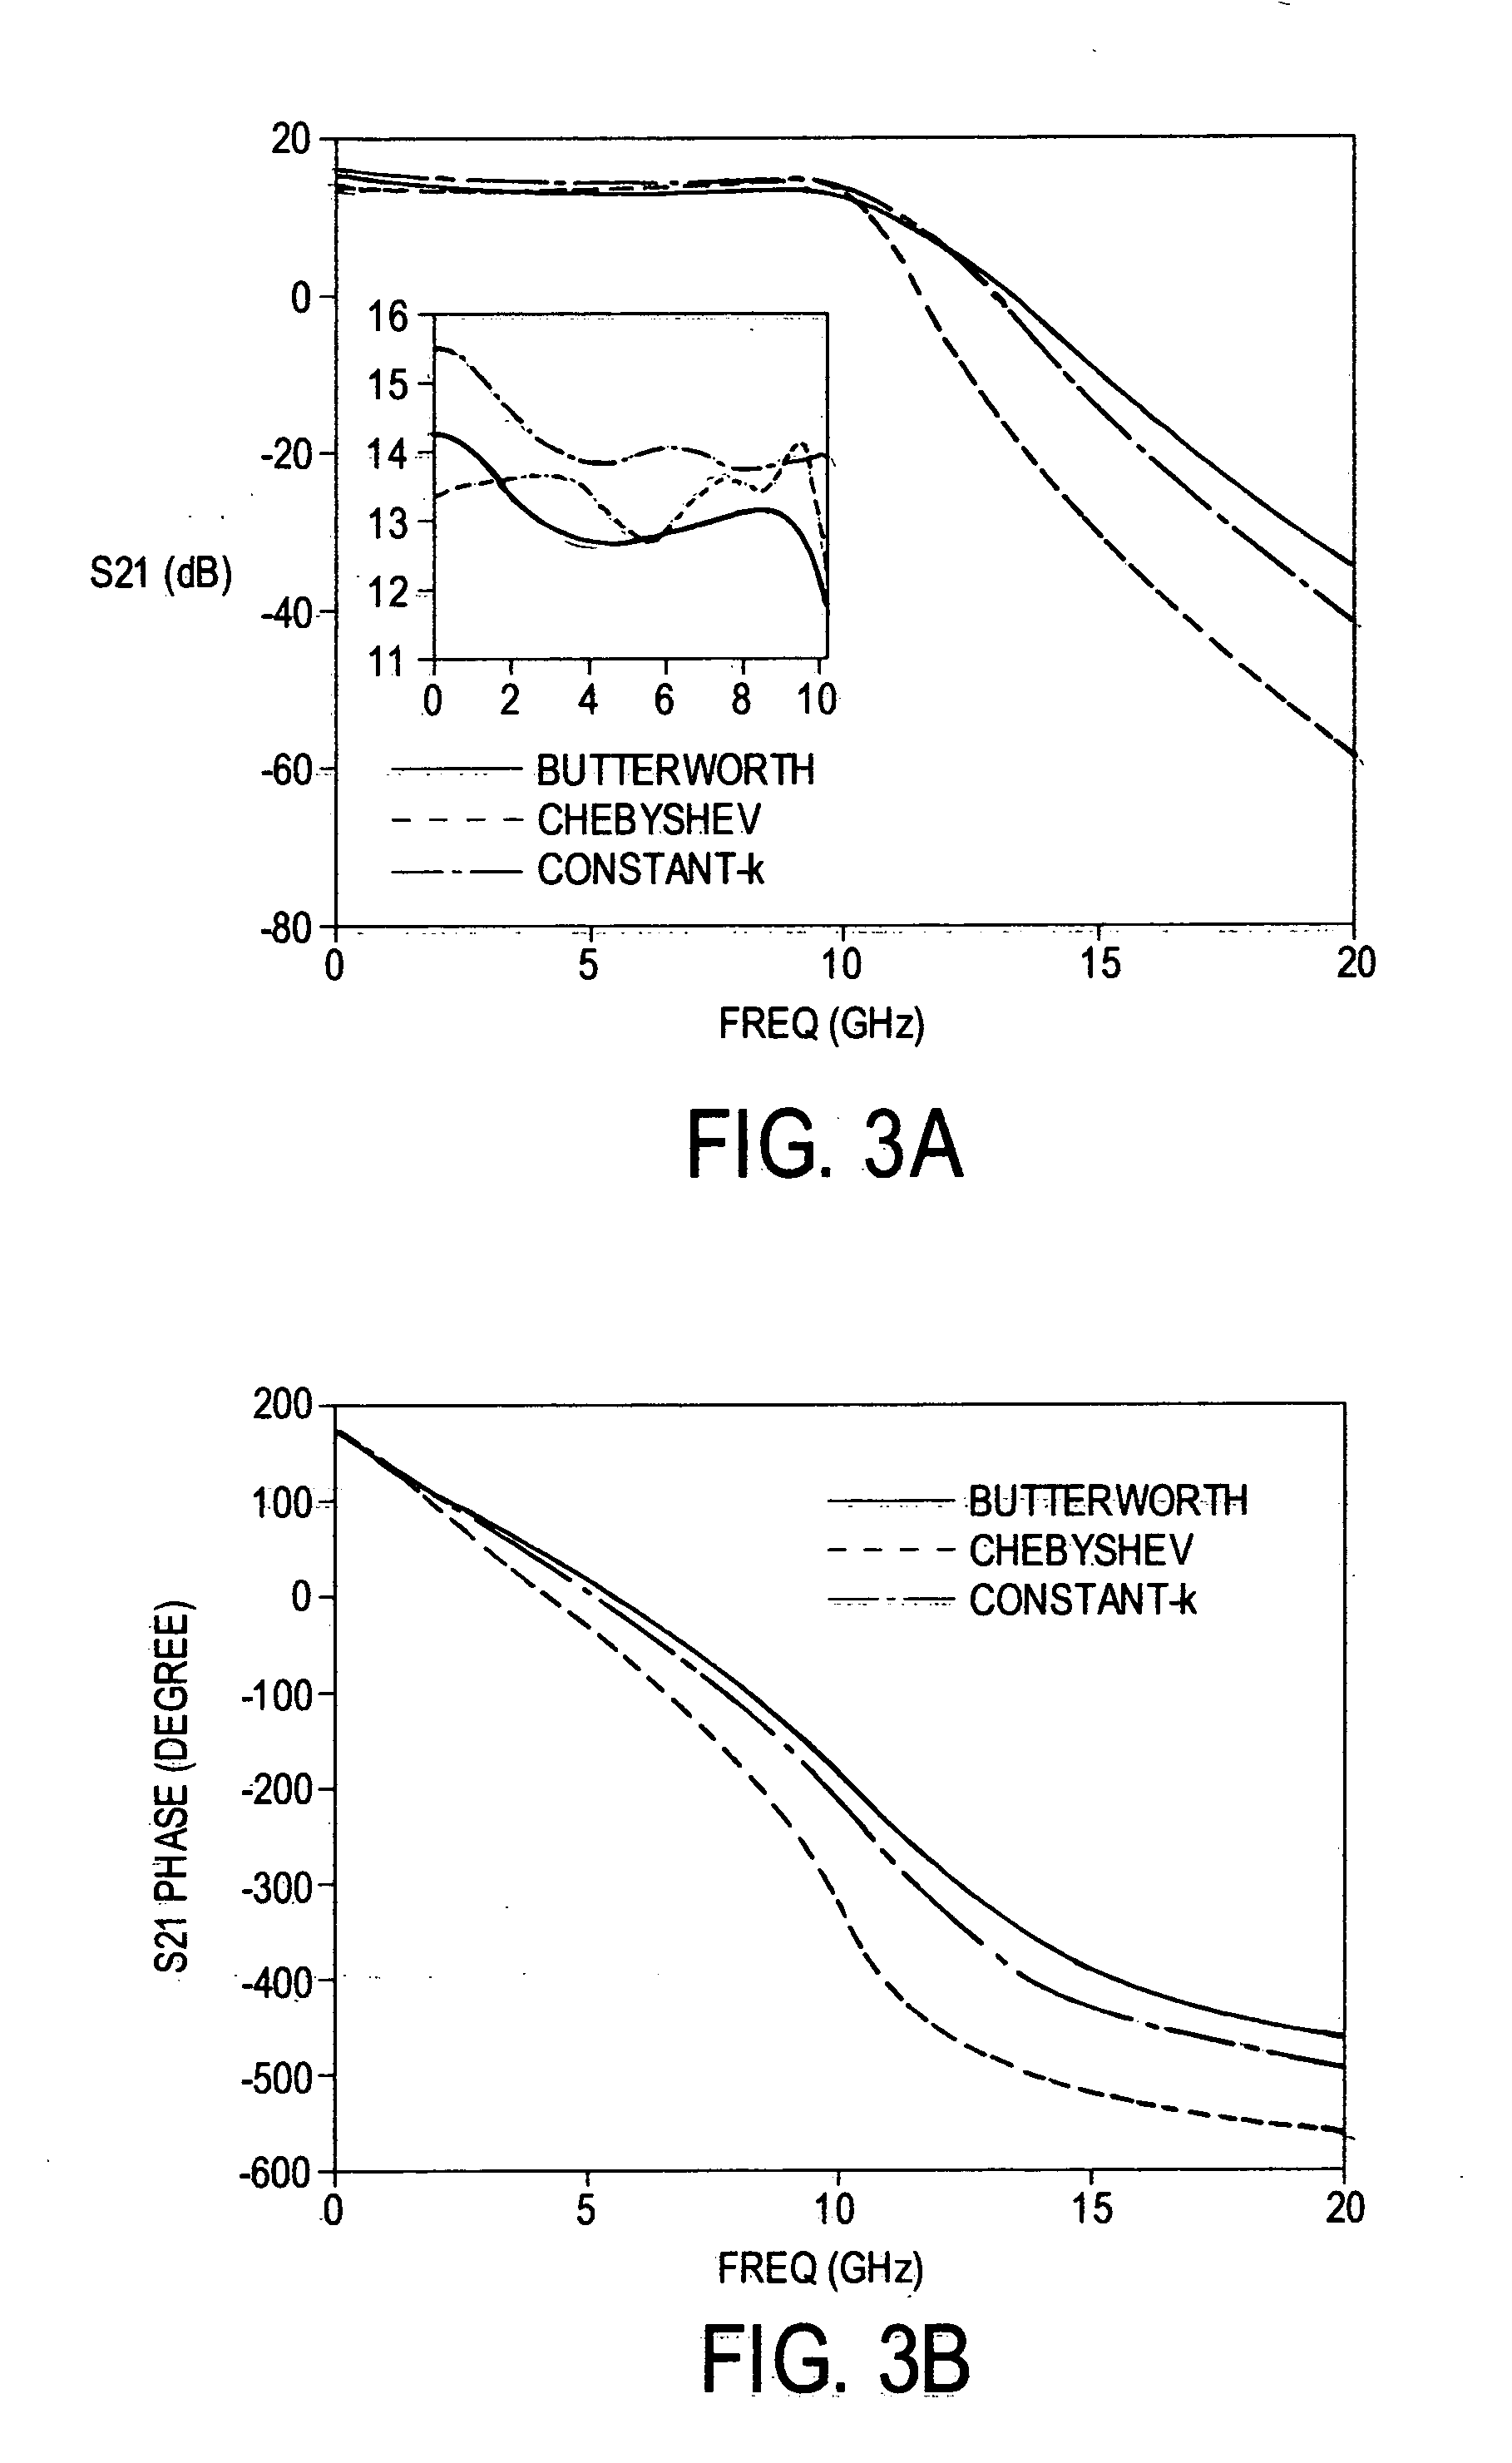 Distributed amplifier with built-in filtering functions